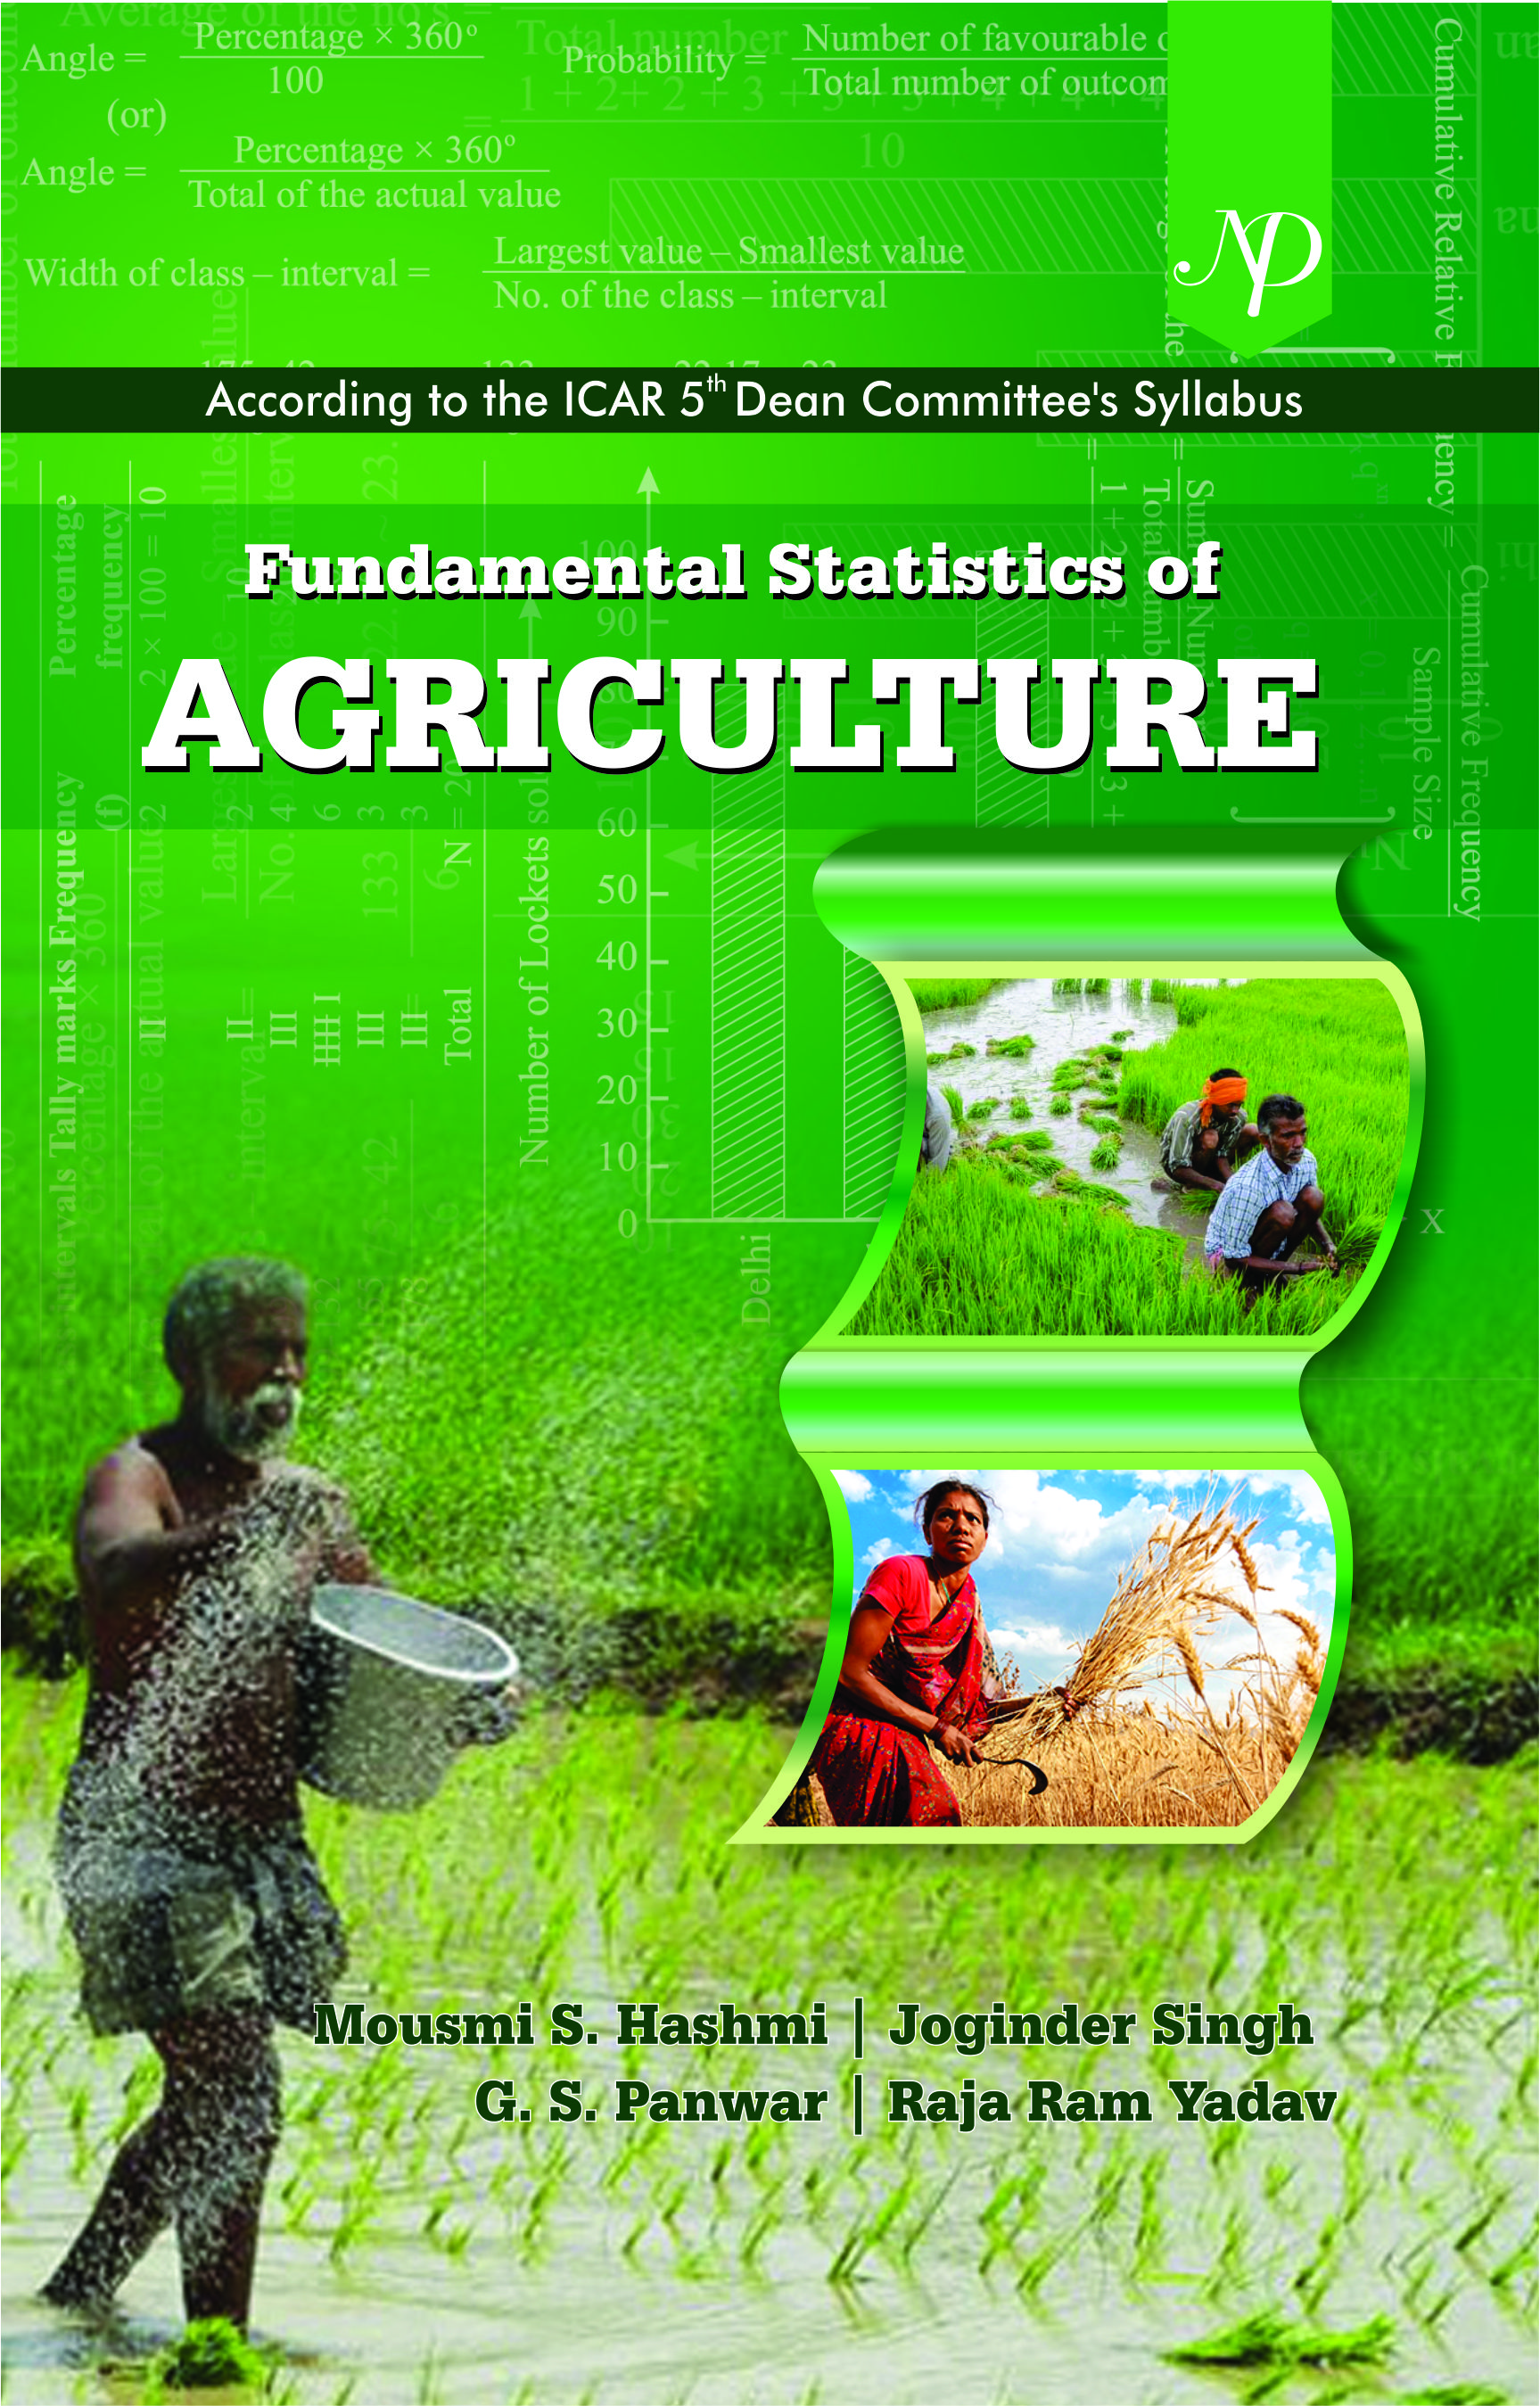 Fundamental Statistic of Agriculture Cover.jpg